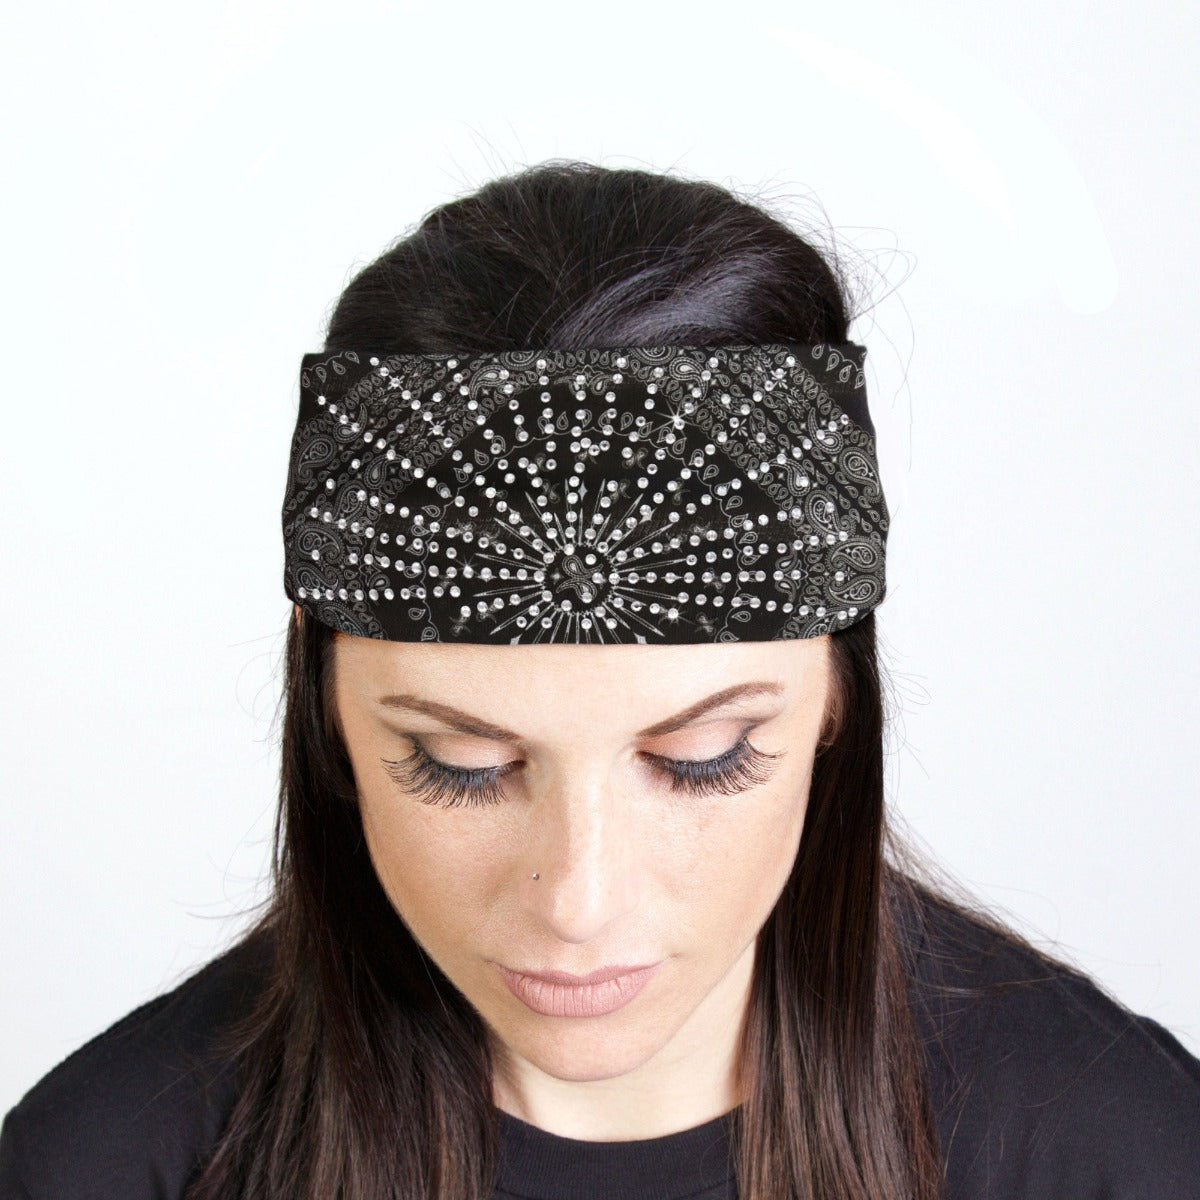 A woman donning a Hot Leathers Bandana Headband Wraps w/Rhinestones, exuding biker style with a touch of sparkle.